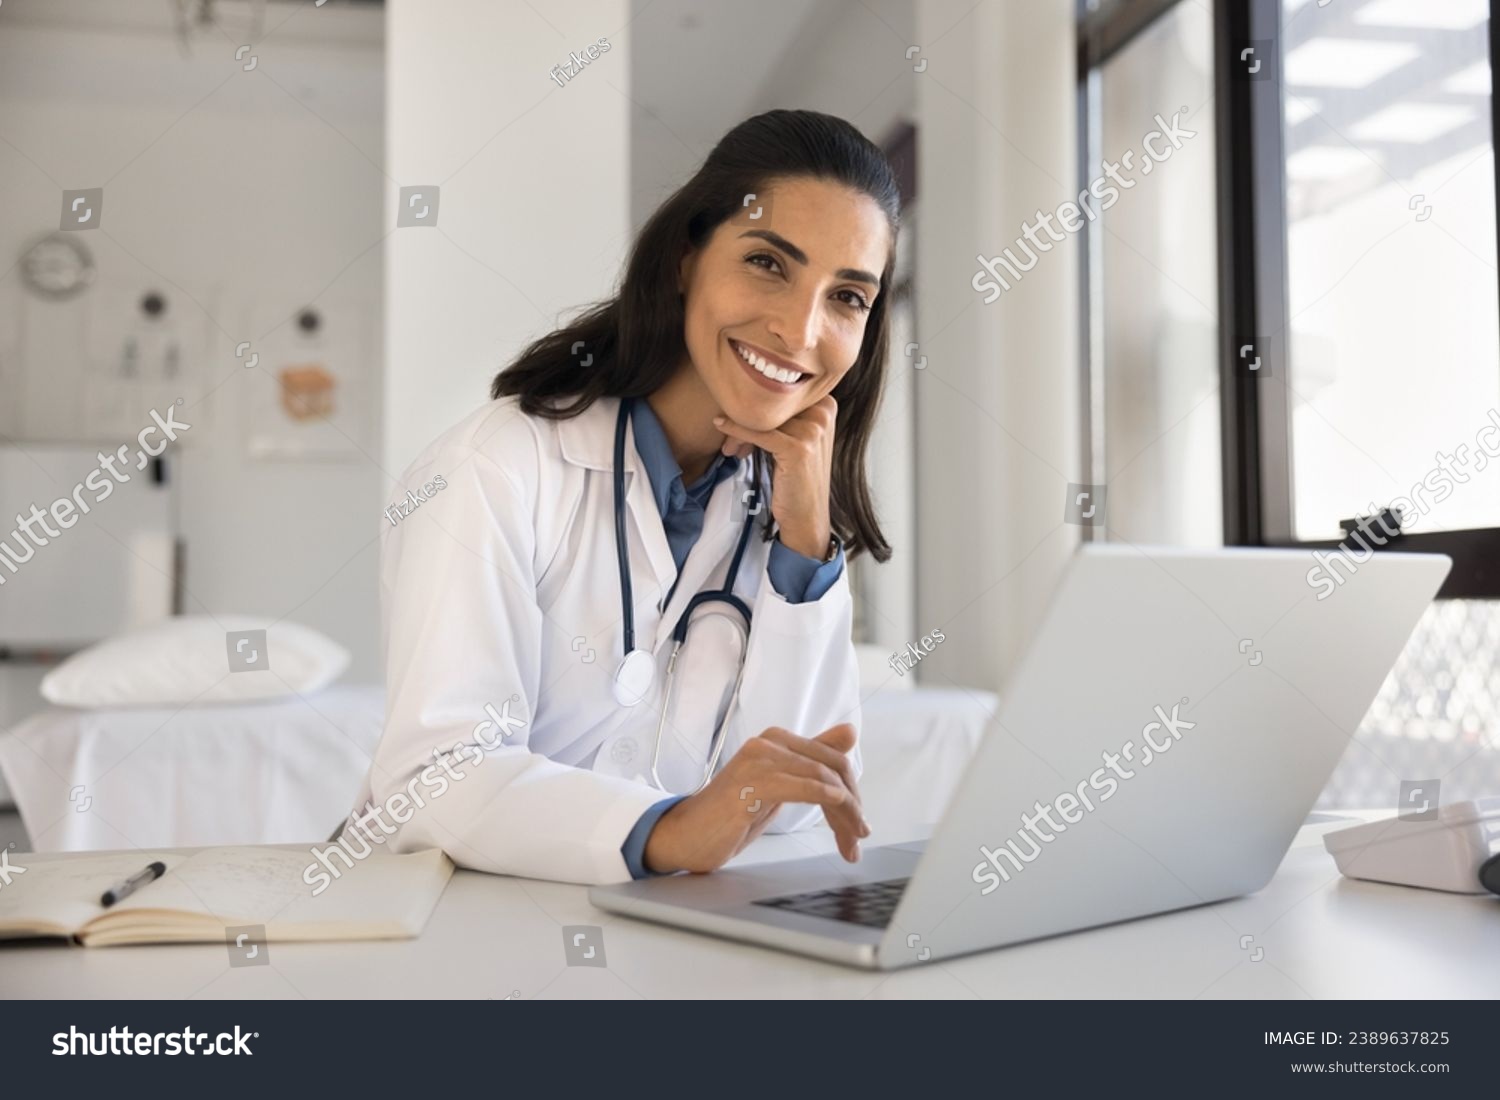 Cheerful attractive doctor woman professional portrait. Young Latin practitioner sitting at workplace table with laptop, looking at camera with toothy smile posing for shooting in surgery office #2389637825